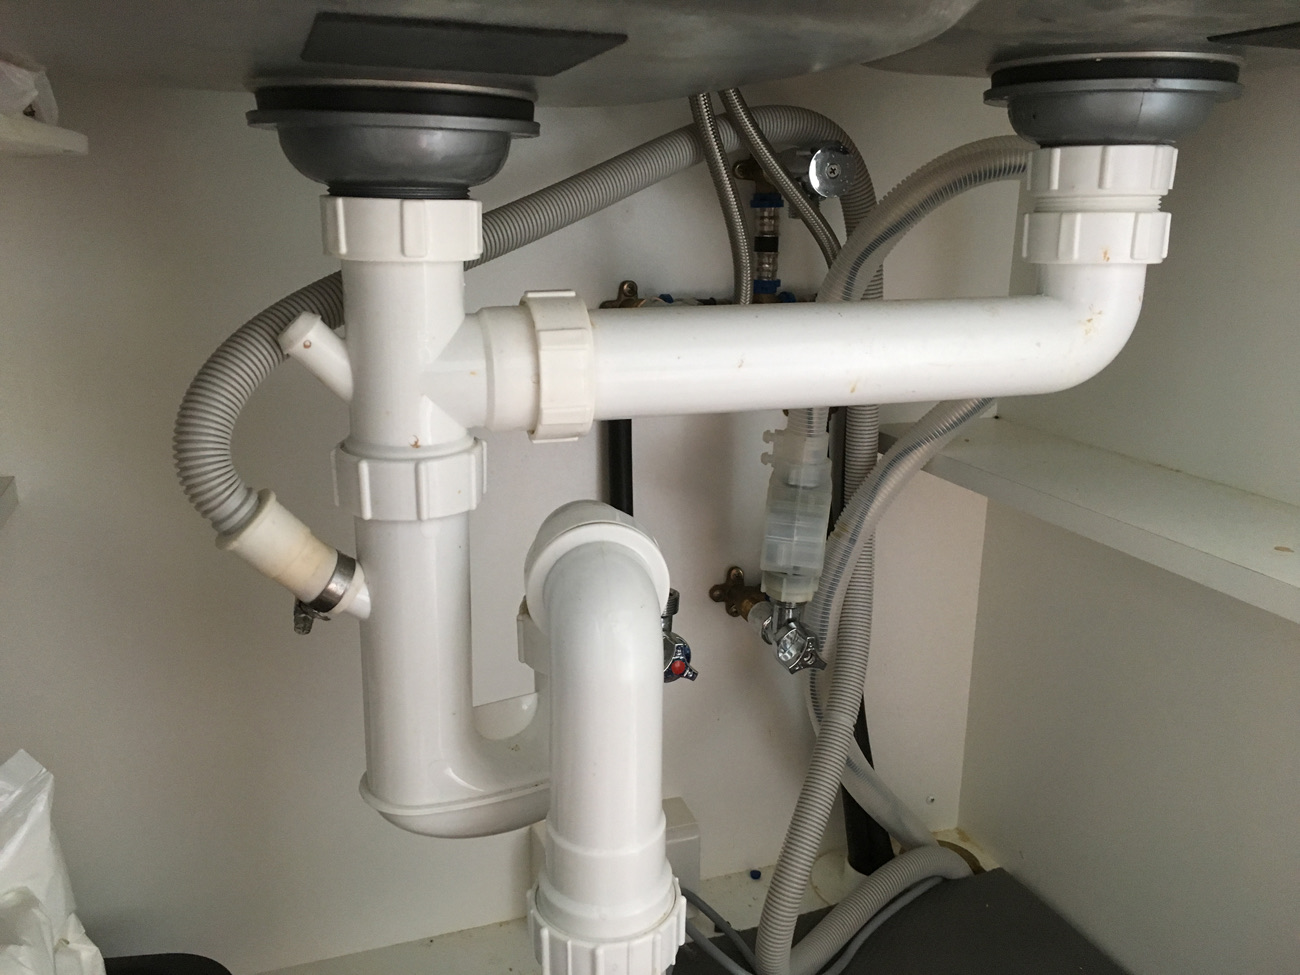 How To Move Sink Plumbing Over A Few Inches